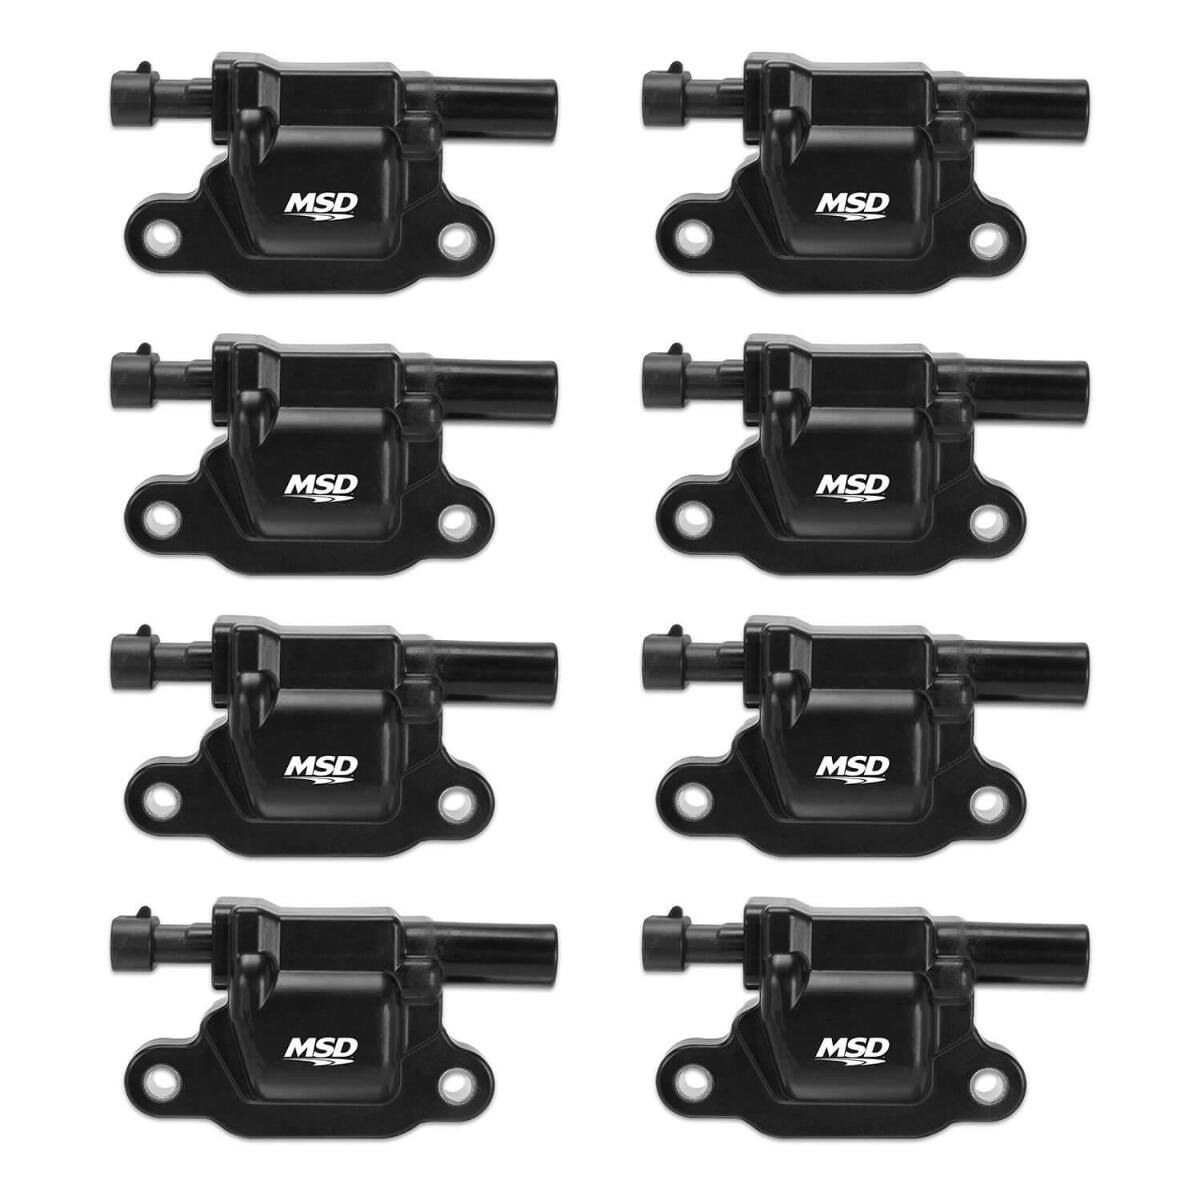 MSD Ignition Coil 1999-2009 GM L-Series Truck engines, Black, 8-Pack - 826583